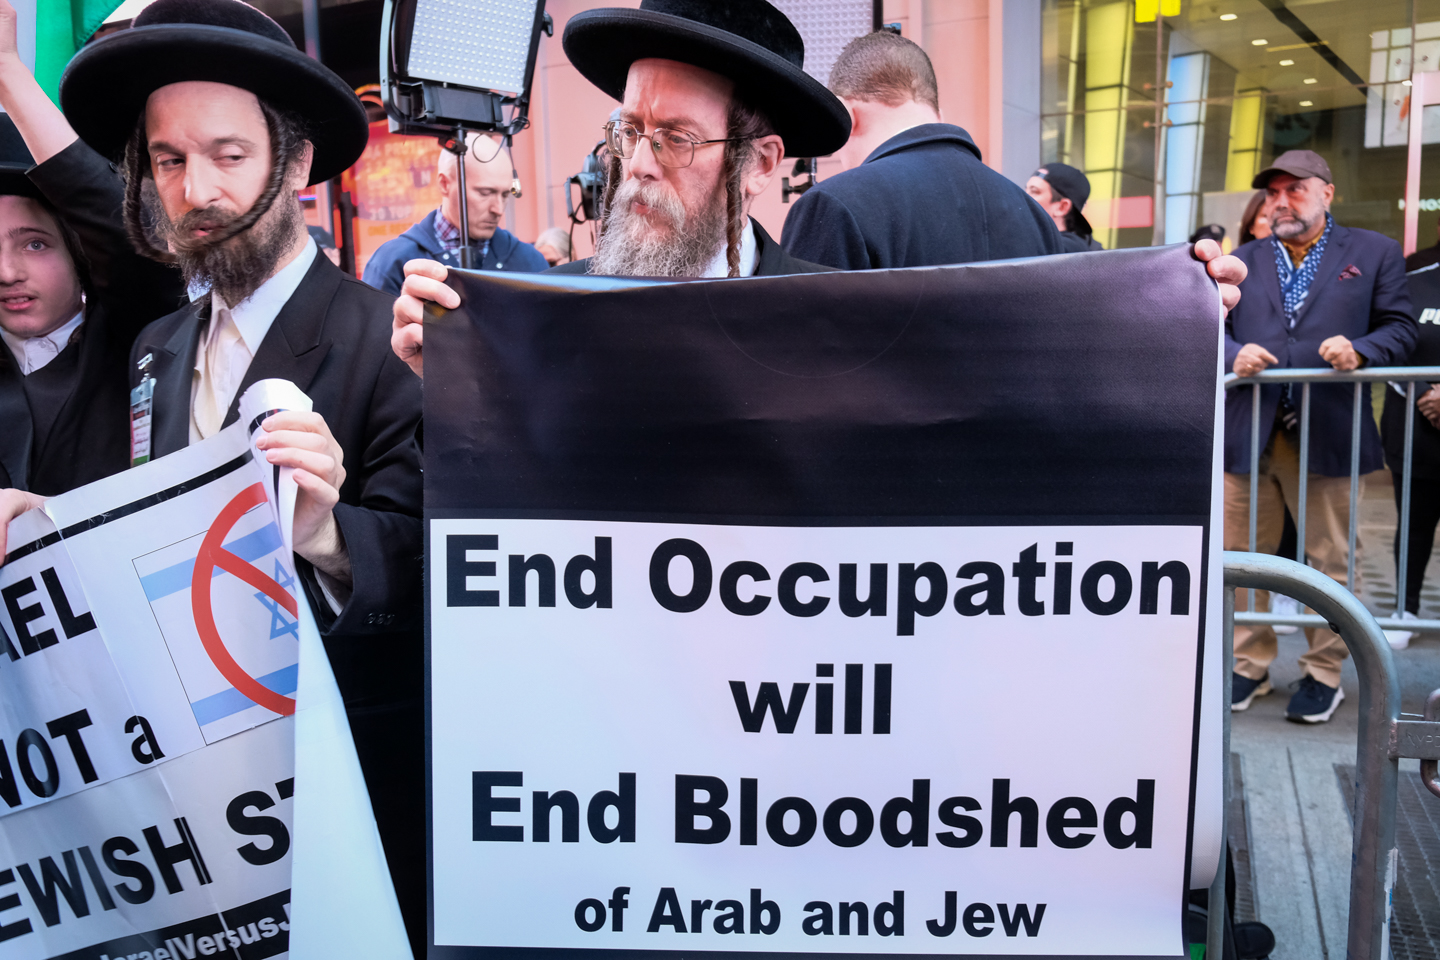 Moses Buchinger, 67, of the Neturei Karta, a sect of Judaism that calls for the 